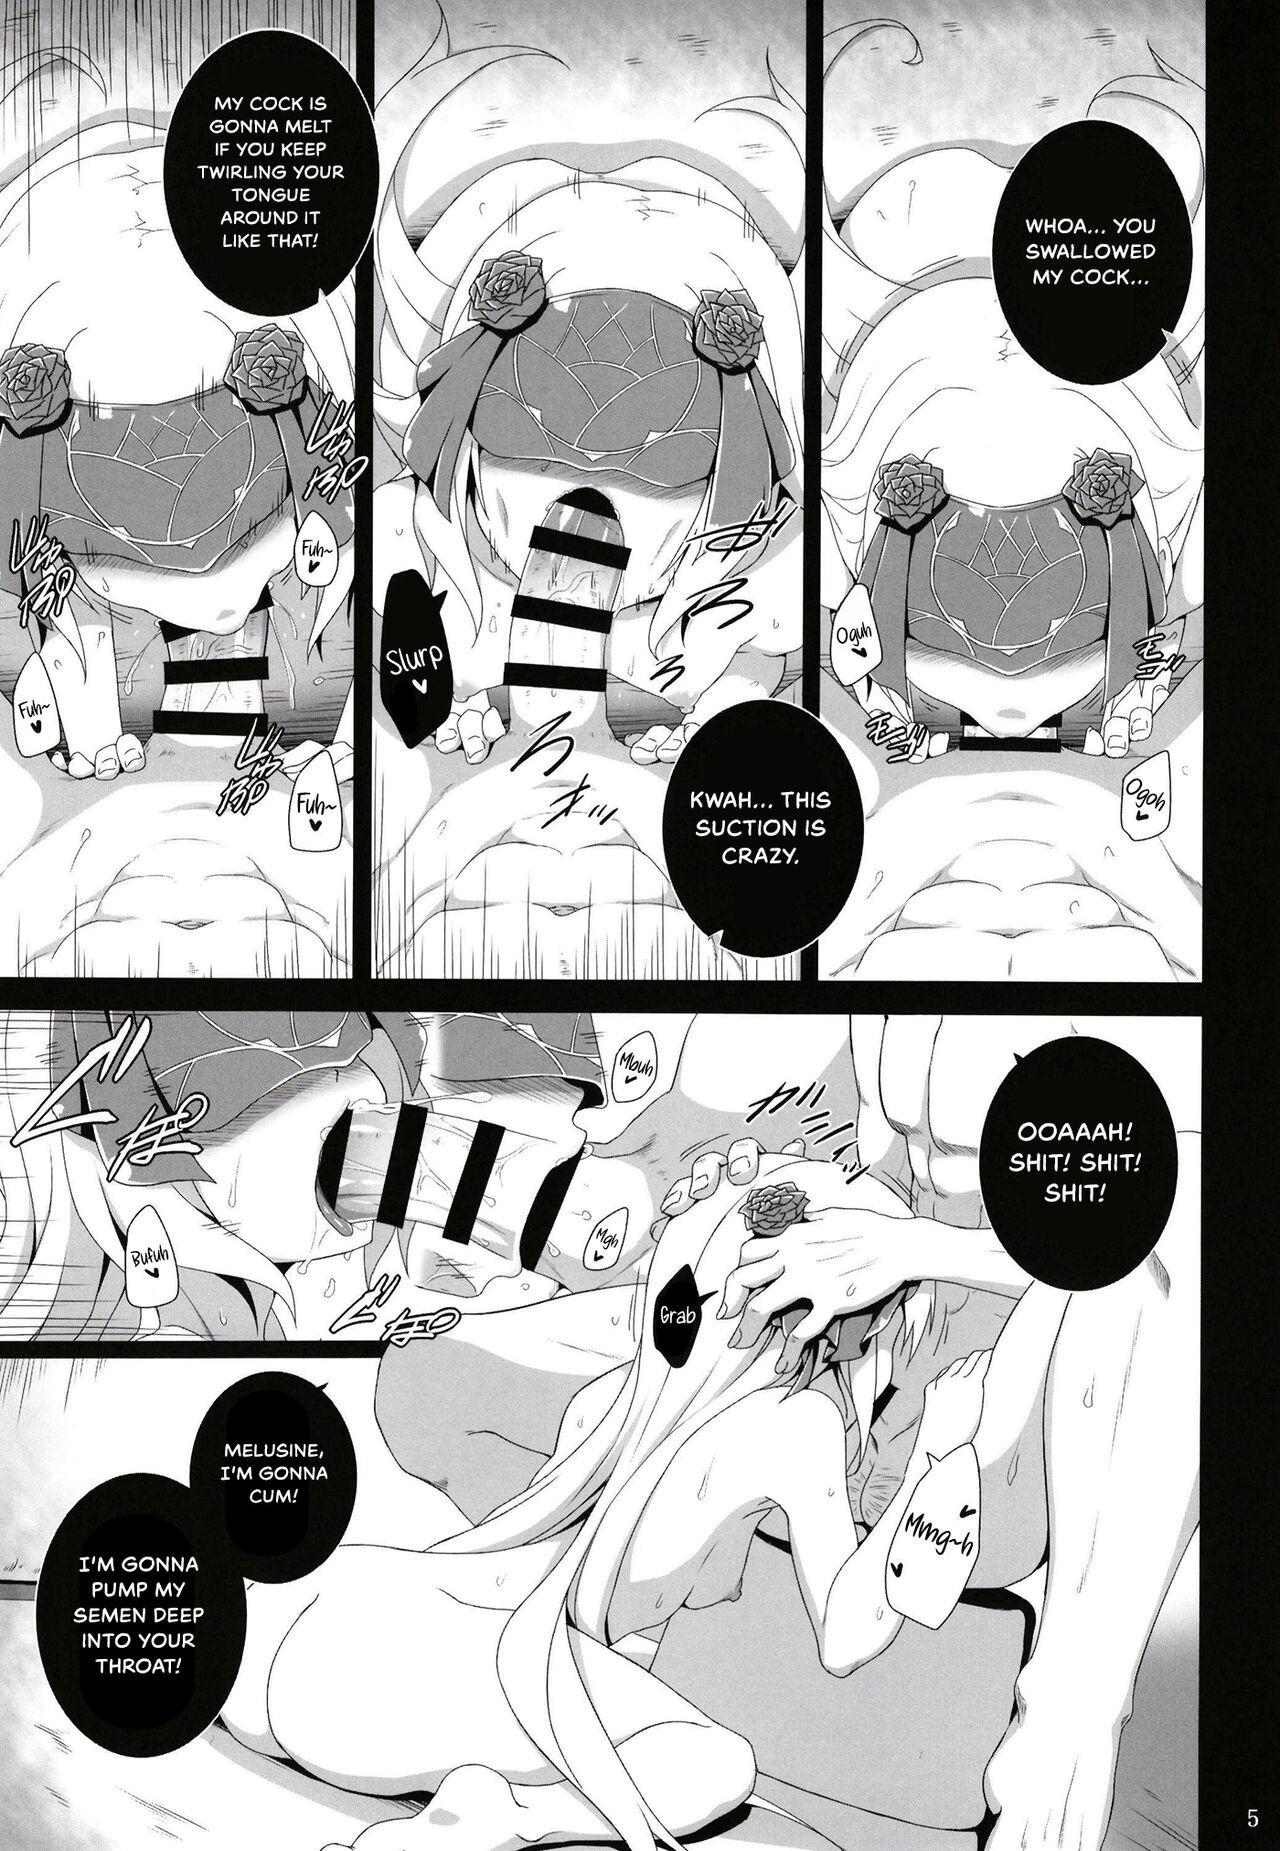 Ejaculation Melusine to Ofuro de Ichaicha suru Hon | A Book About Making Love With Melusine In The Bath - Fate grand order Sexo - Page 7